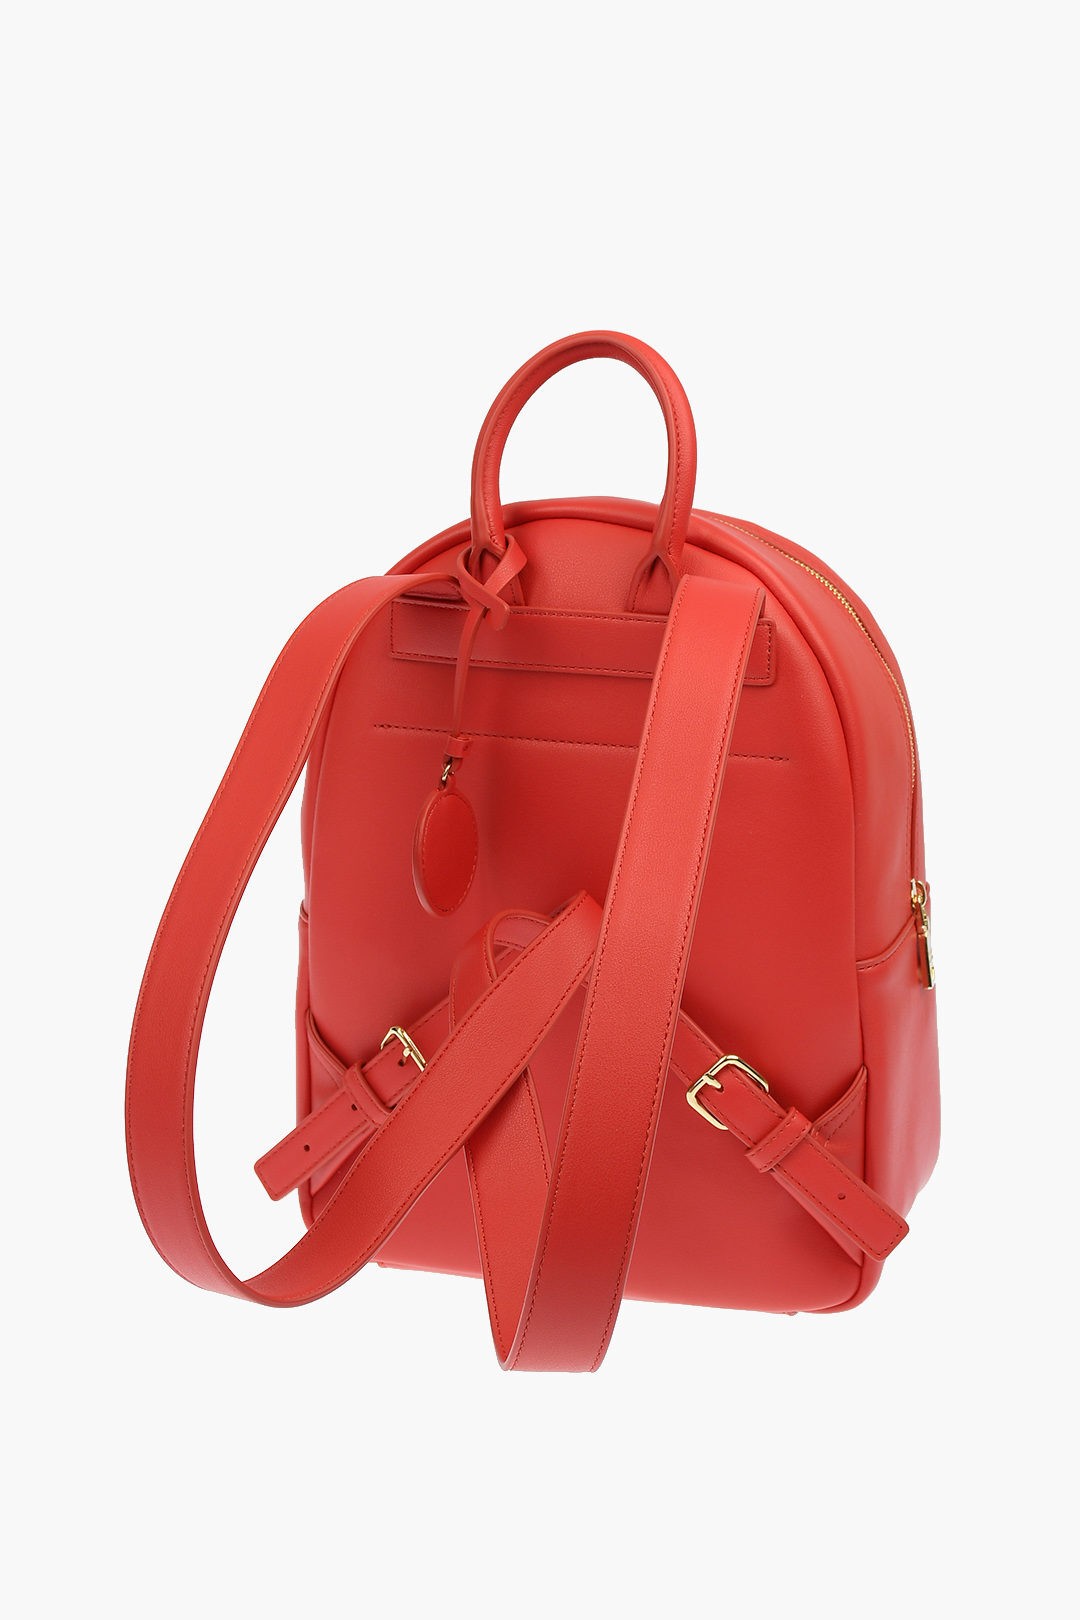 MOSCHINO モスキーノ Red バックパック JC4109PP1CLJ050A レディース LOVE FAUX LEATHER GOLD METAL LOGO BACKPACK 【関税・送料無料】【ラッピング無料】 dk